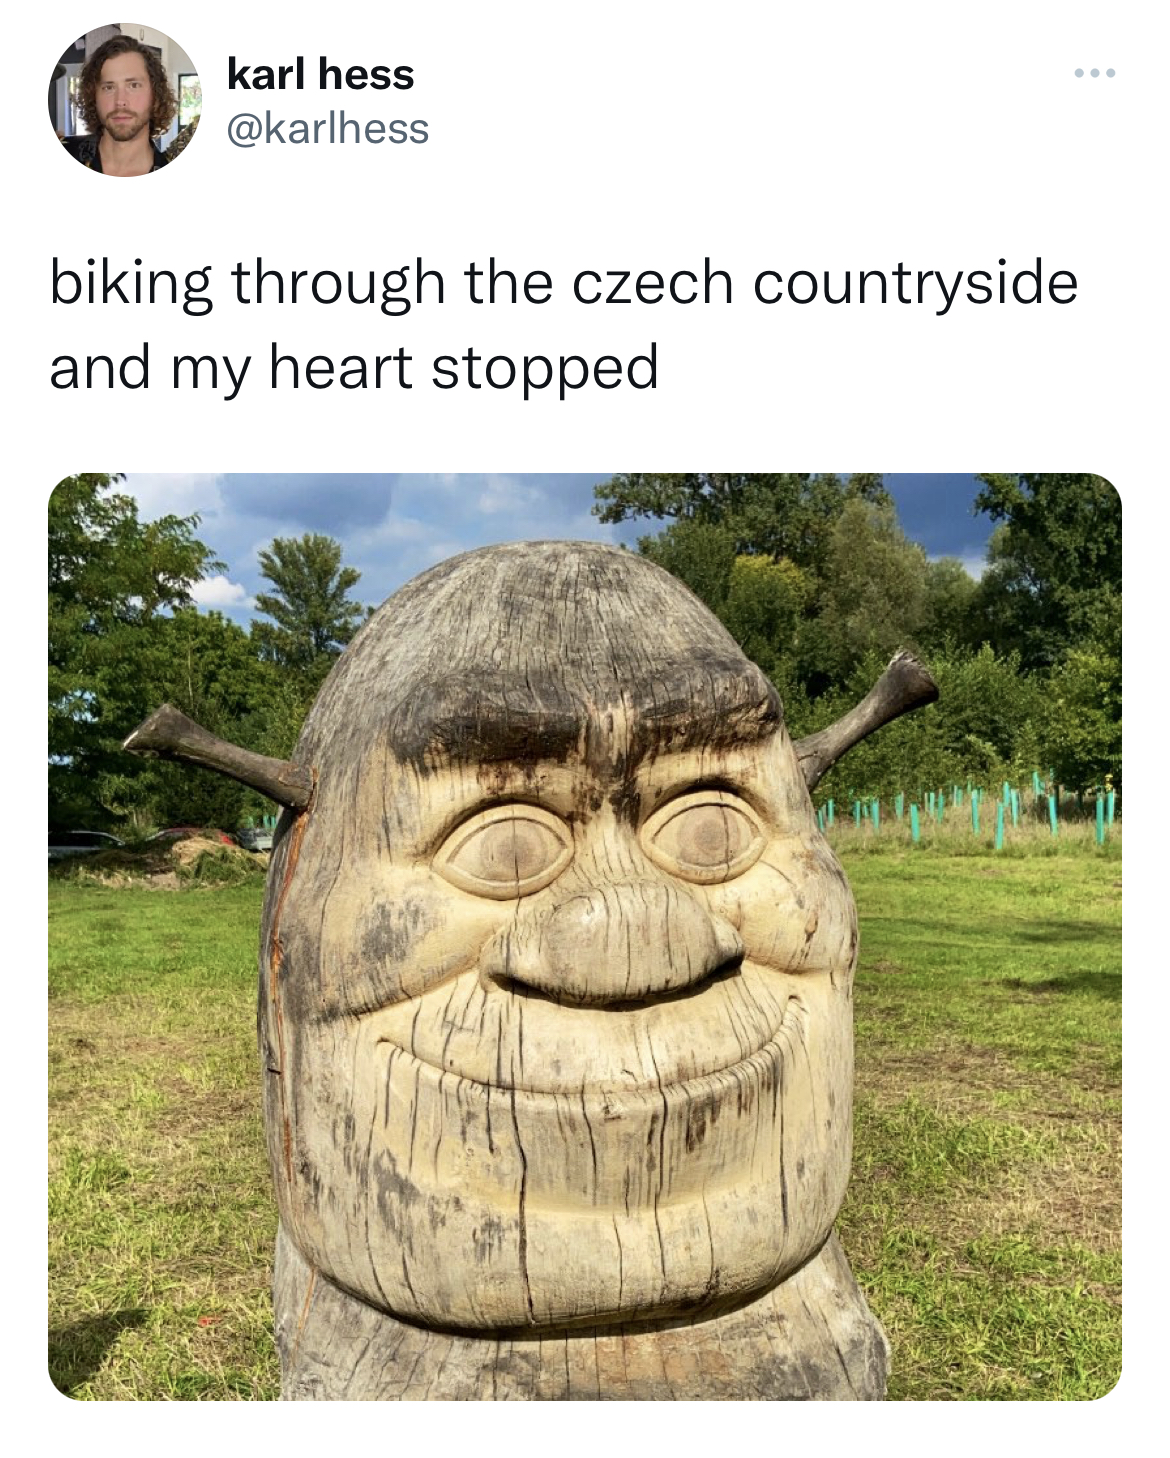 Fresh Daily Tweets - tree - karl hess biking through the czech countryside and my heart stopped